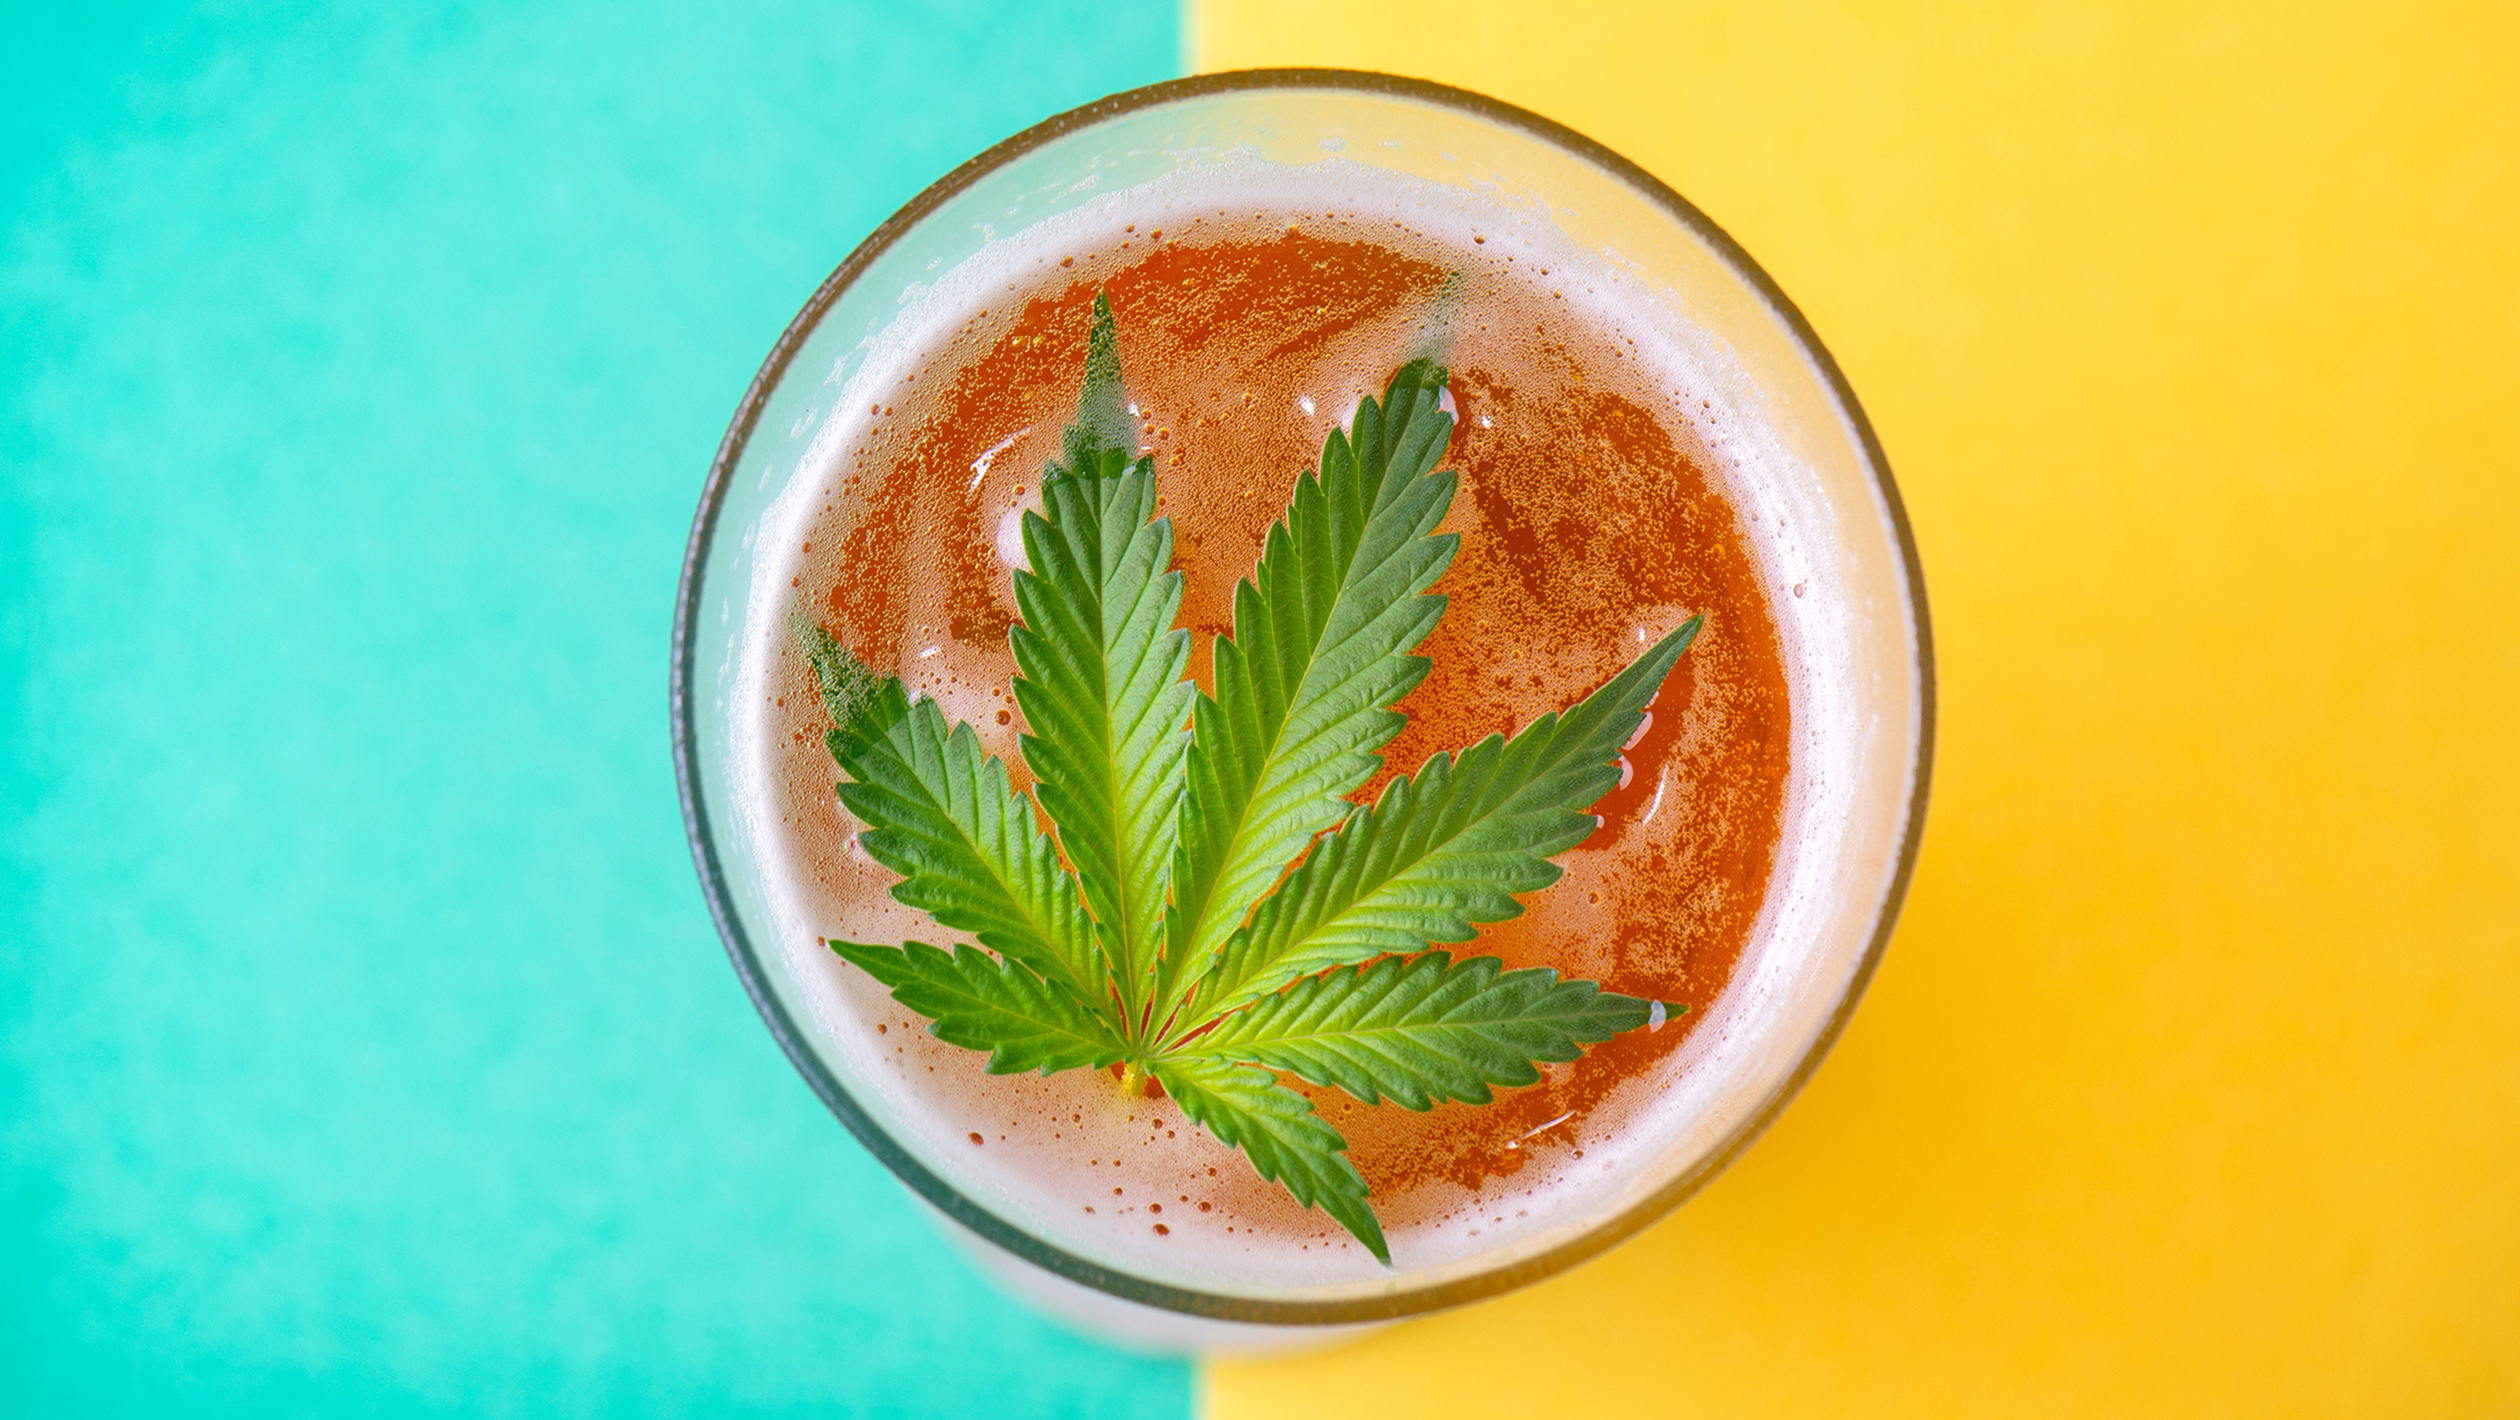 https://daily.sevenfifty.com/app/uploads/2022/11/SFD_How-Breweries-Are-Uniquely-Positioned-to-Enter-the-Cannabis-Beverage-Space_Hero_2520x1420.jpg